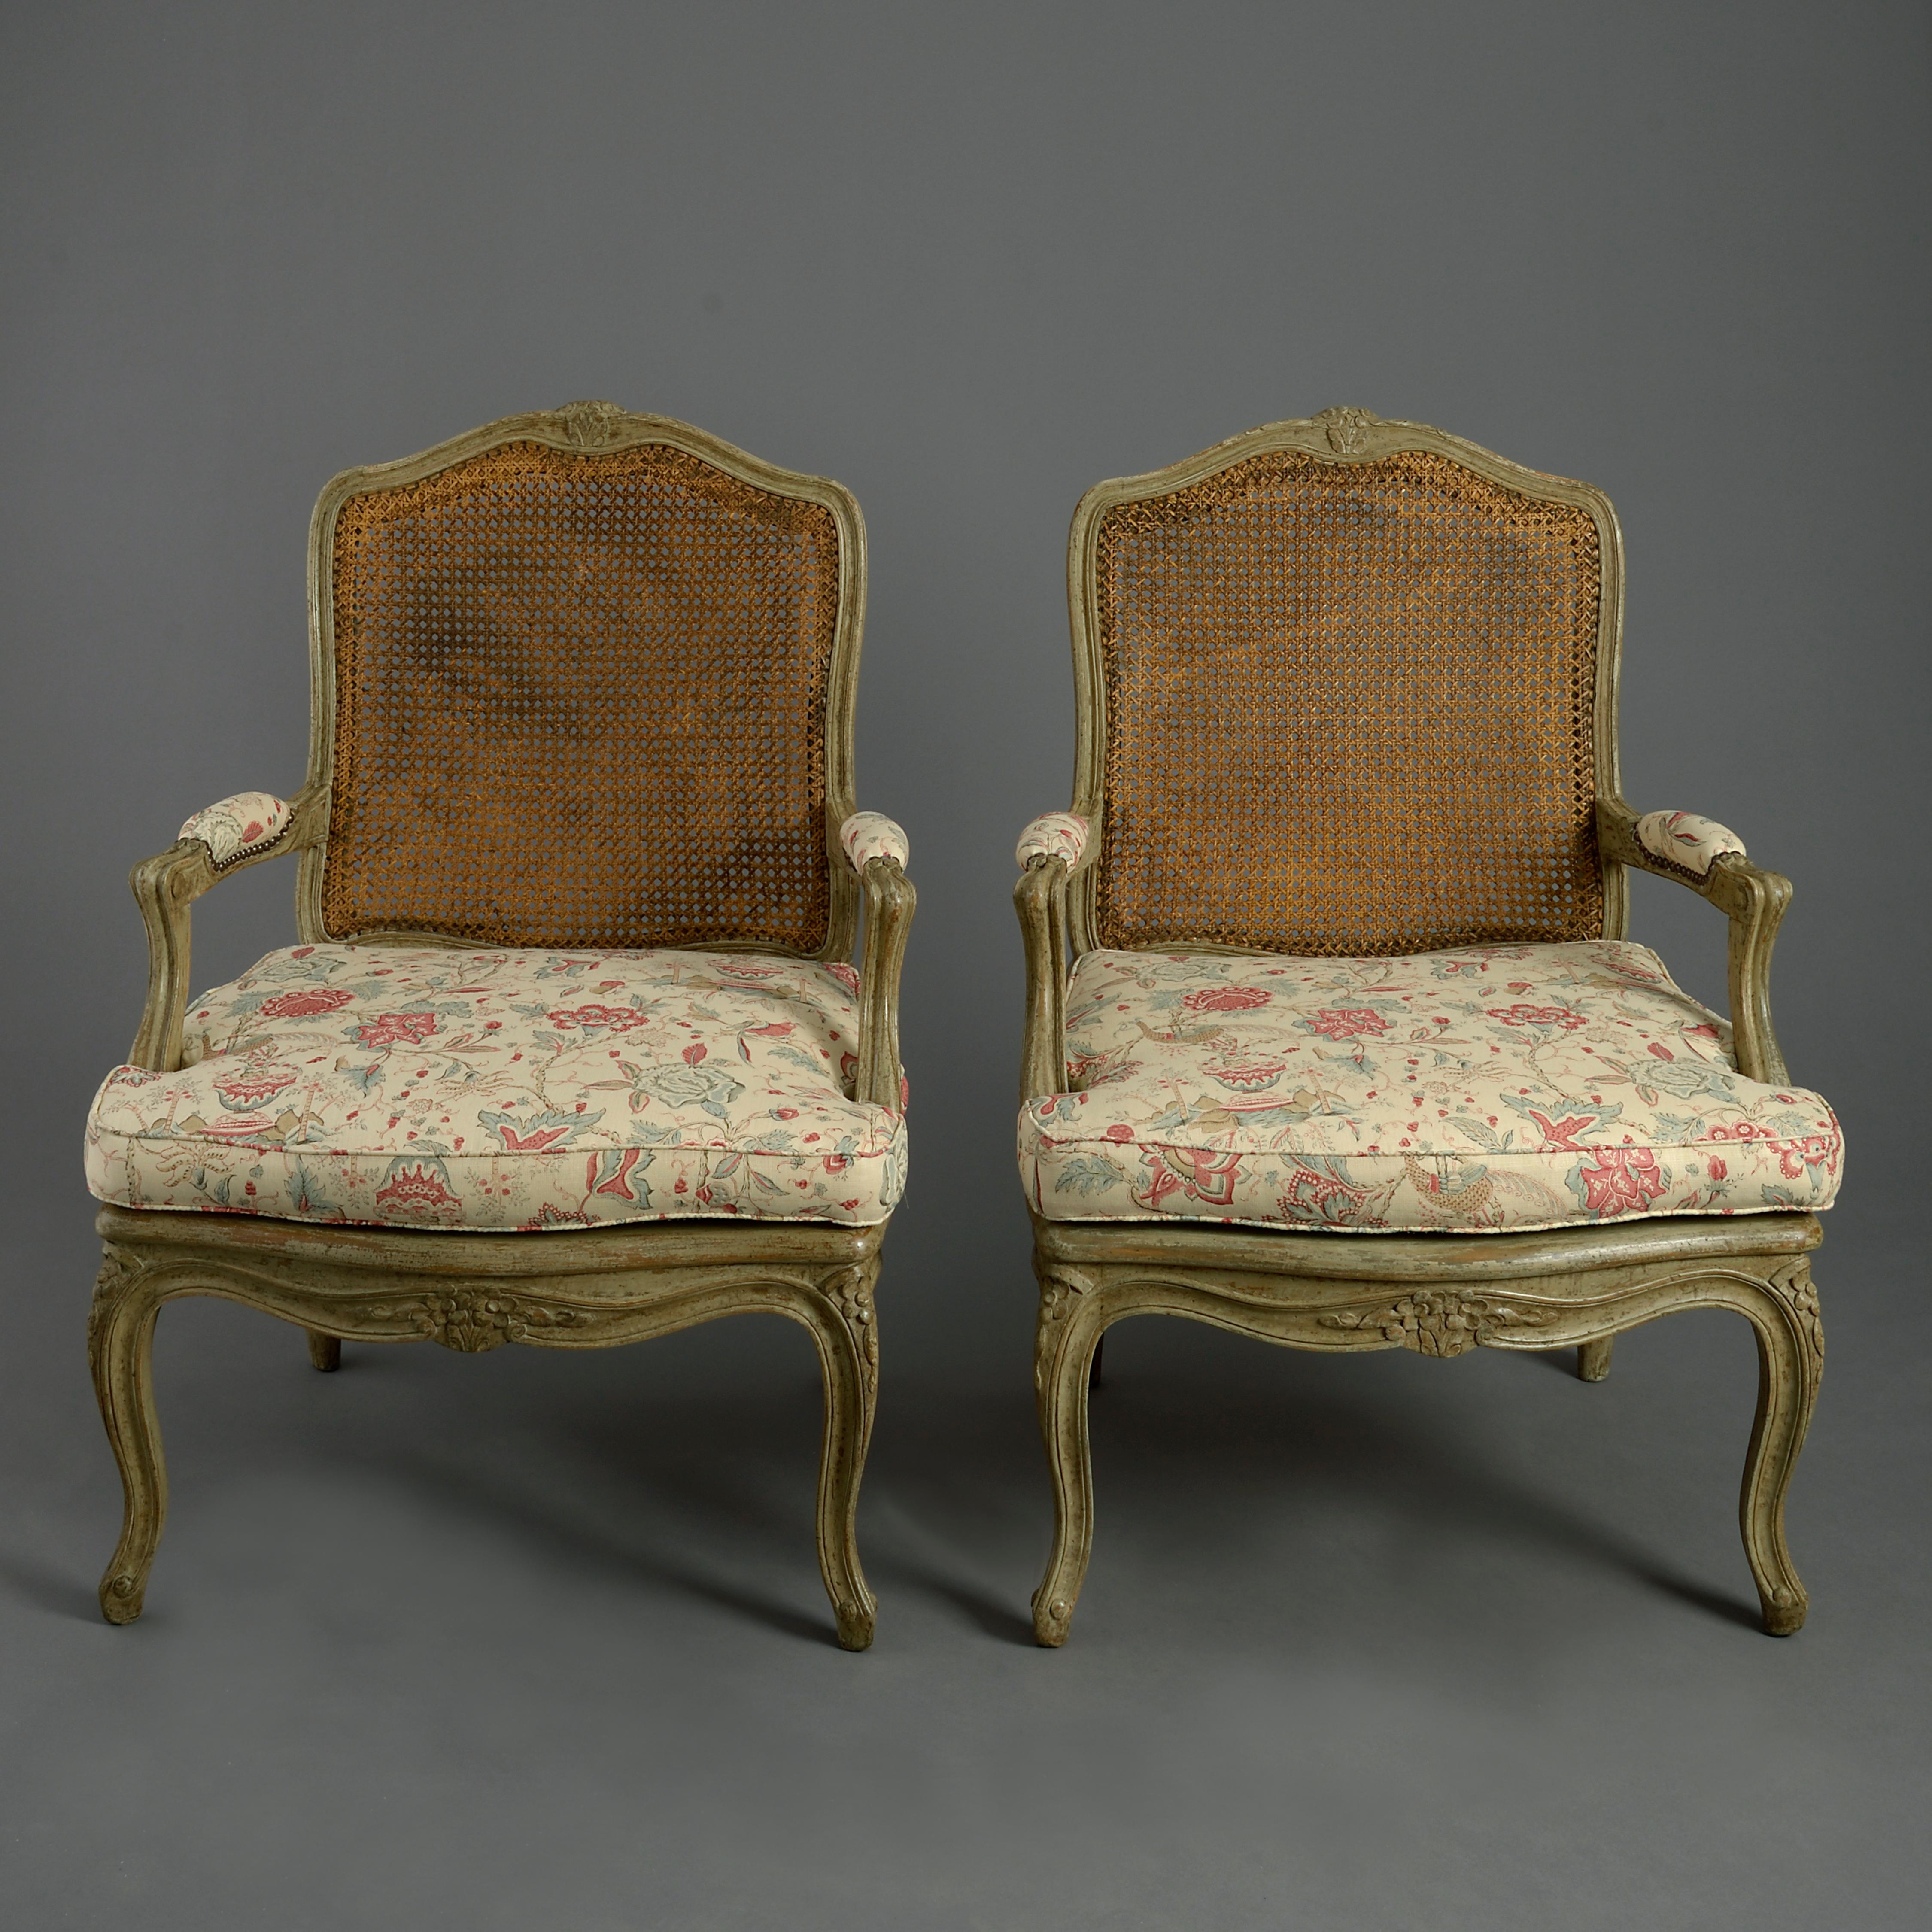 A fine pair of mid-18th century Louis XV period painted fauteuils or open armchairs in the Rococo taste, the cartouche backs and seats with cane work, the arms with upholstered rests, the cresting’s, front seat rails and cabriole legs carved with